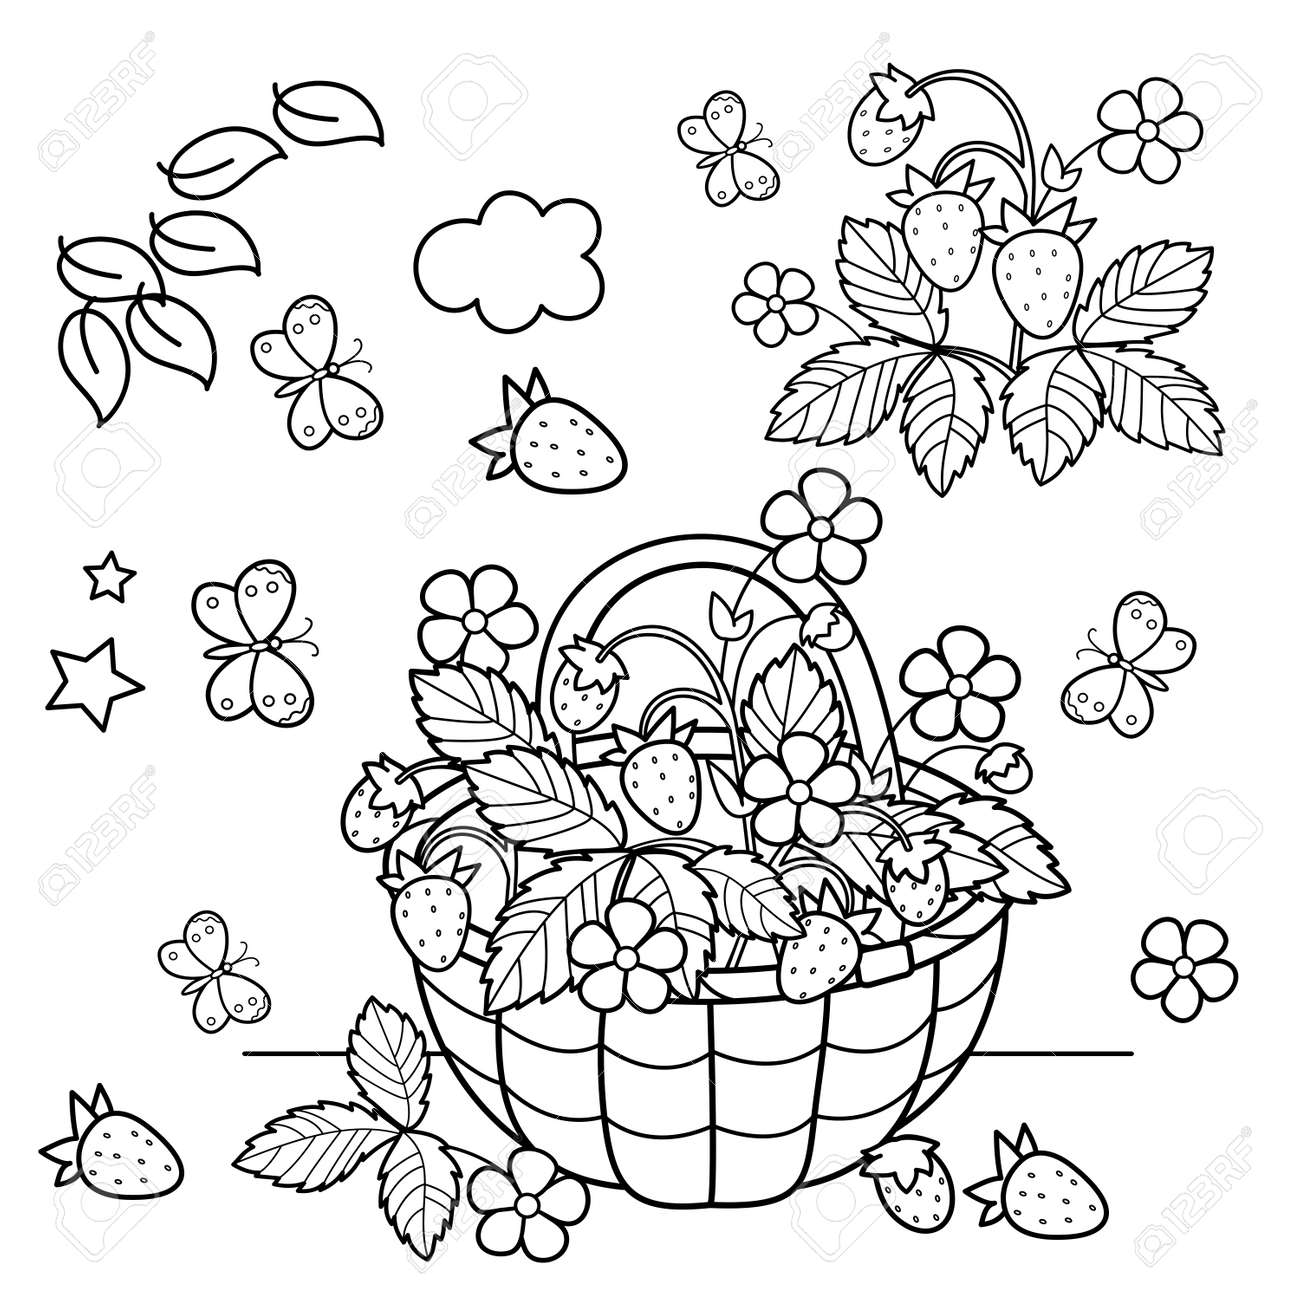 Coloring page outline of cartoon basket of berries garden strawberry summer gifts of nature coloring book for kids royalty free svg cliparts vectors and stock illustration image